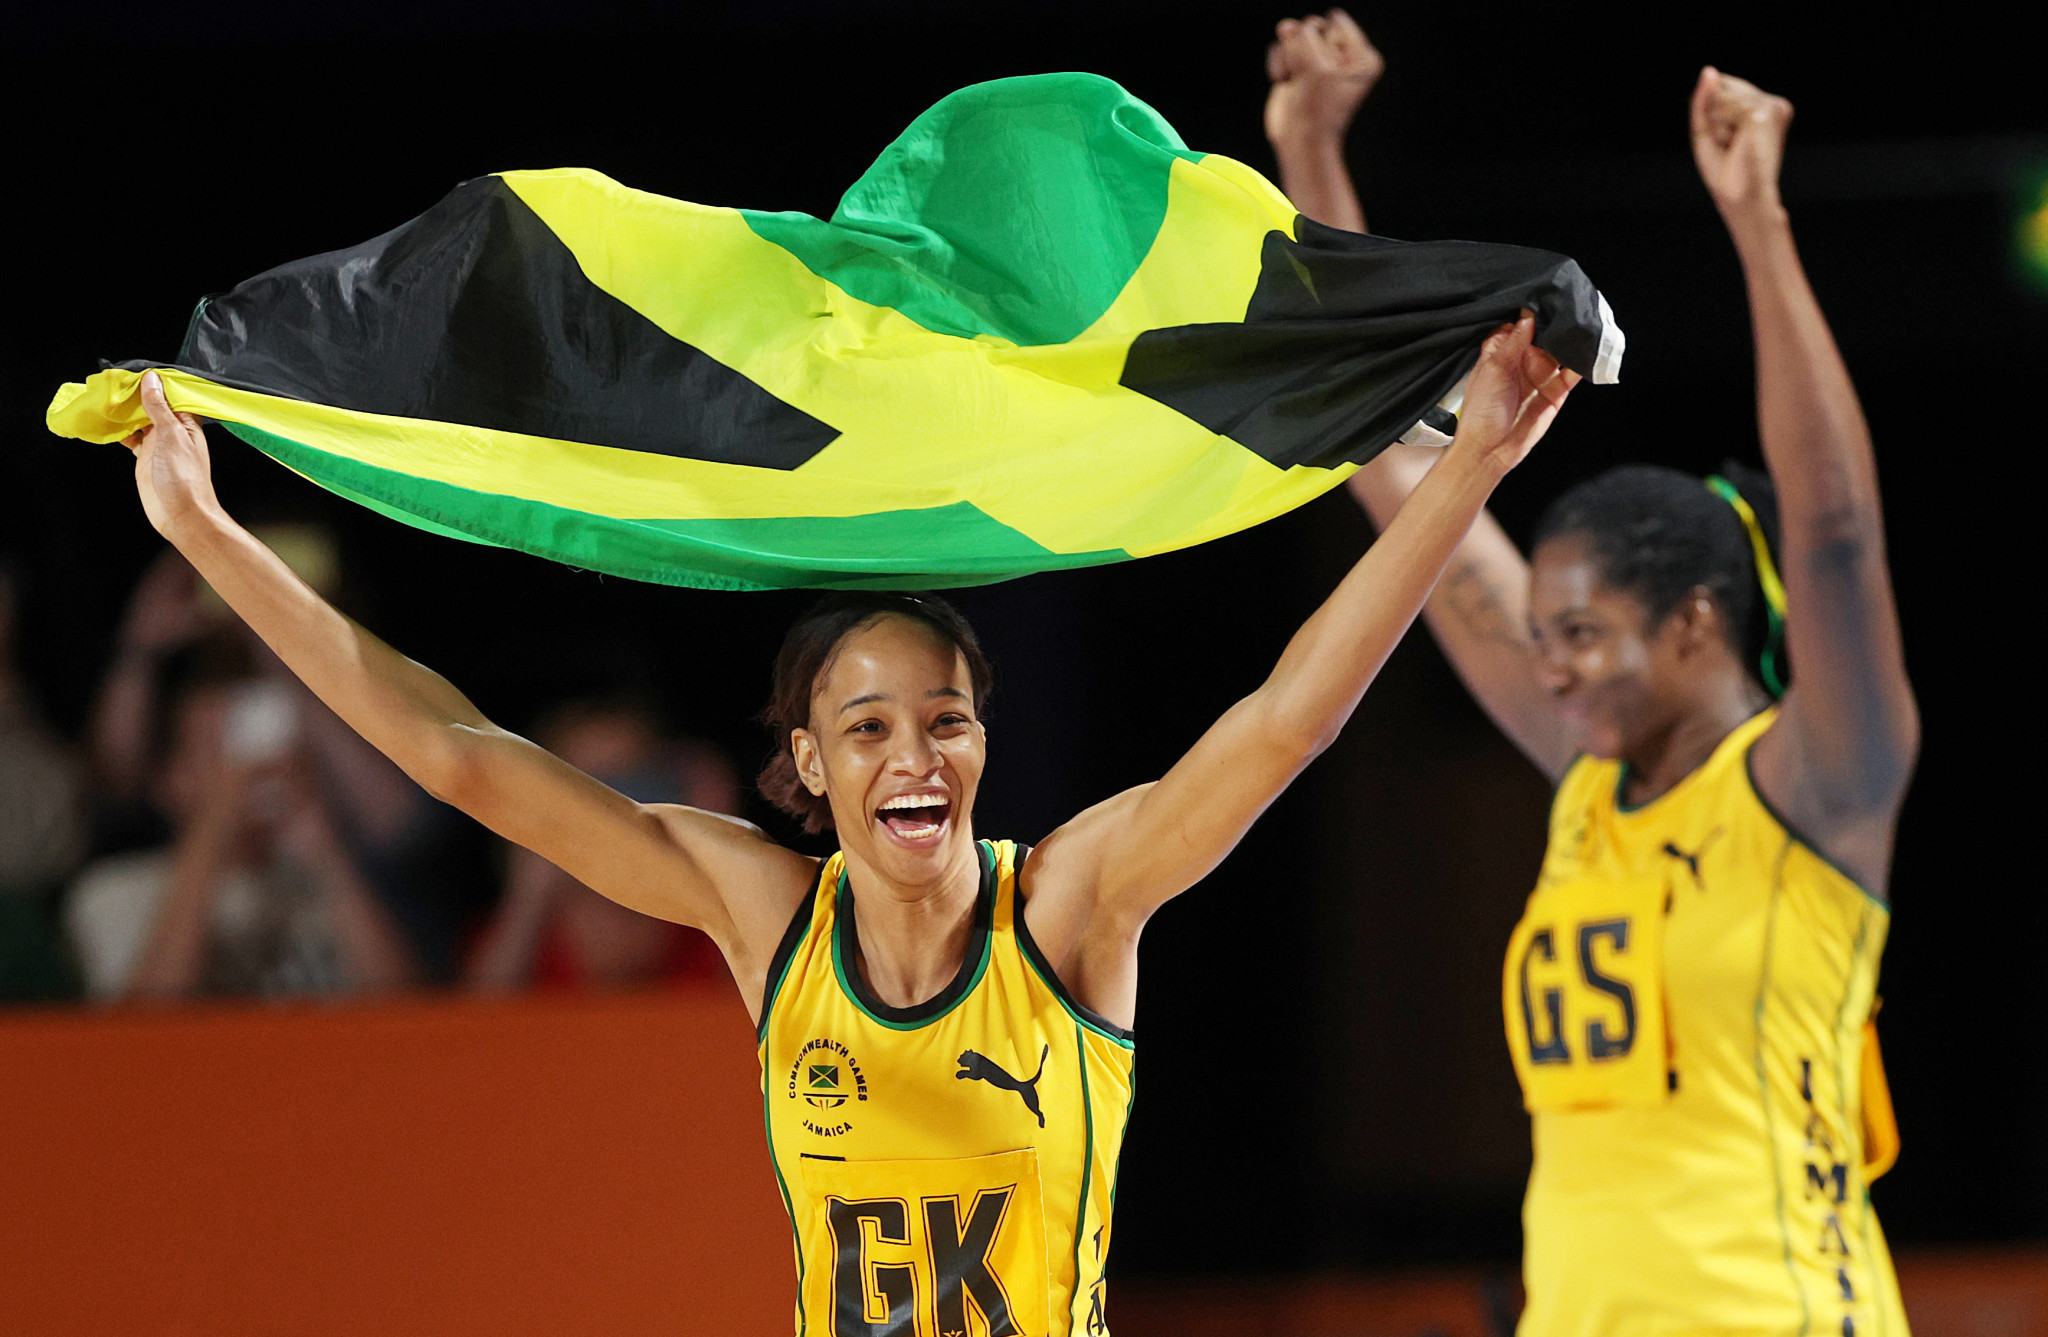 Jamaica qualified for the netball final tomorrow following a win against New Zealand ©Getty Images